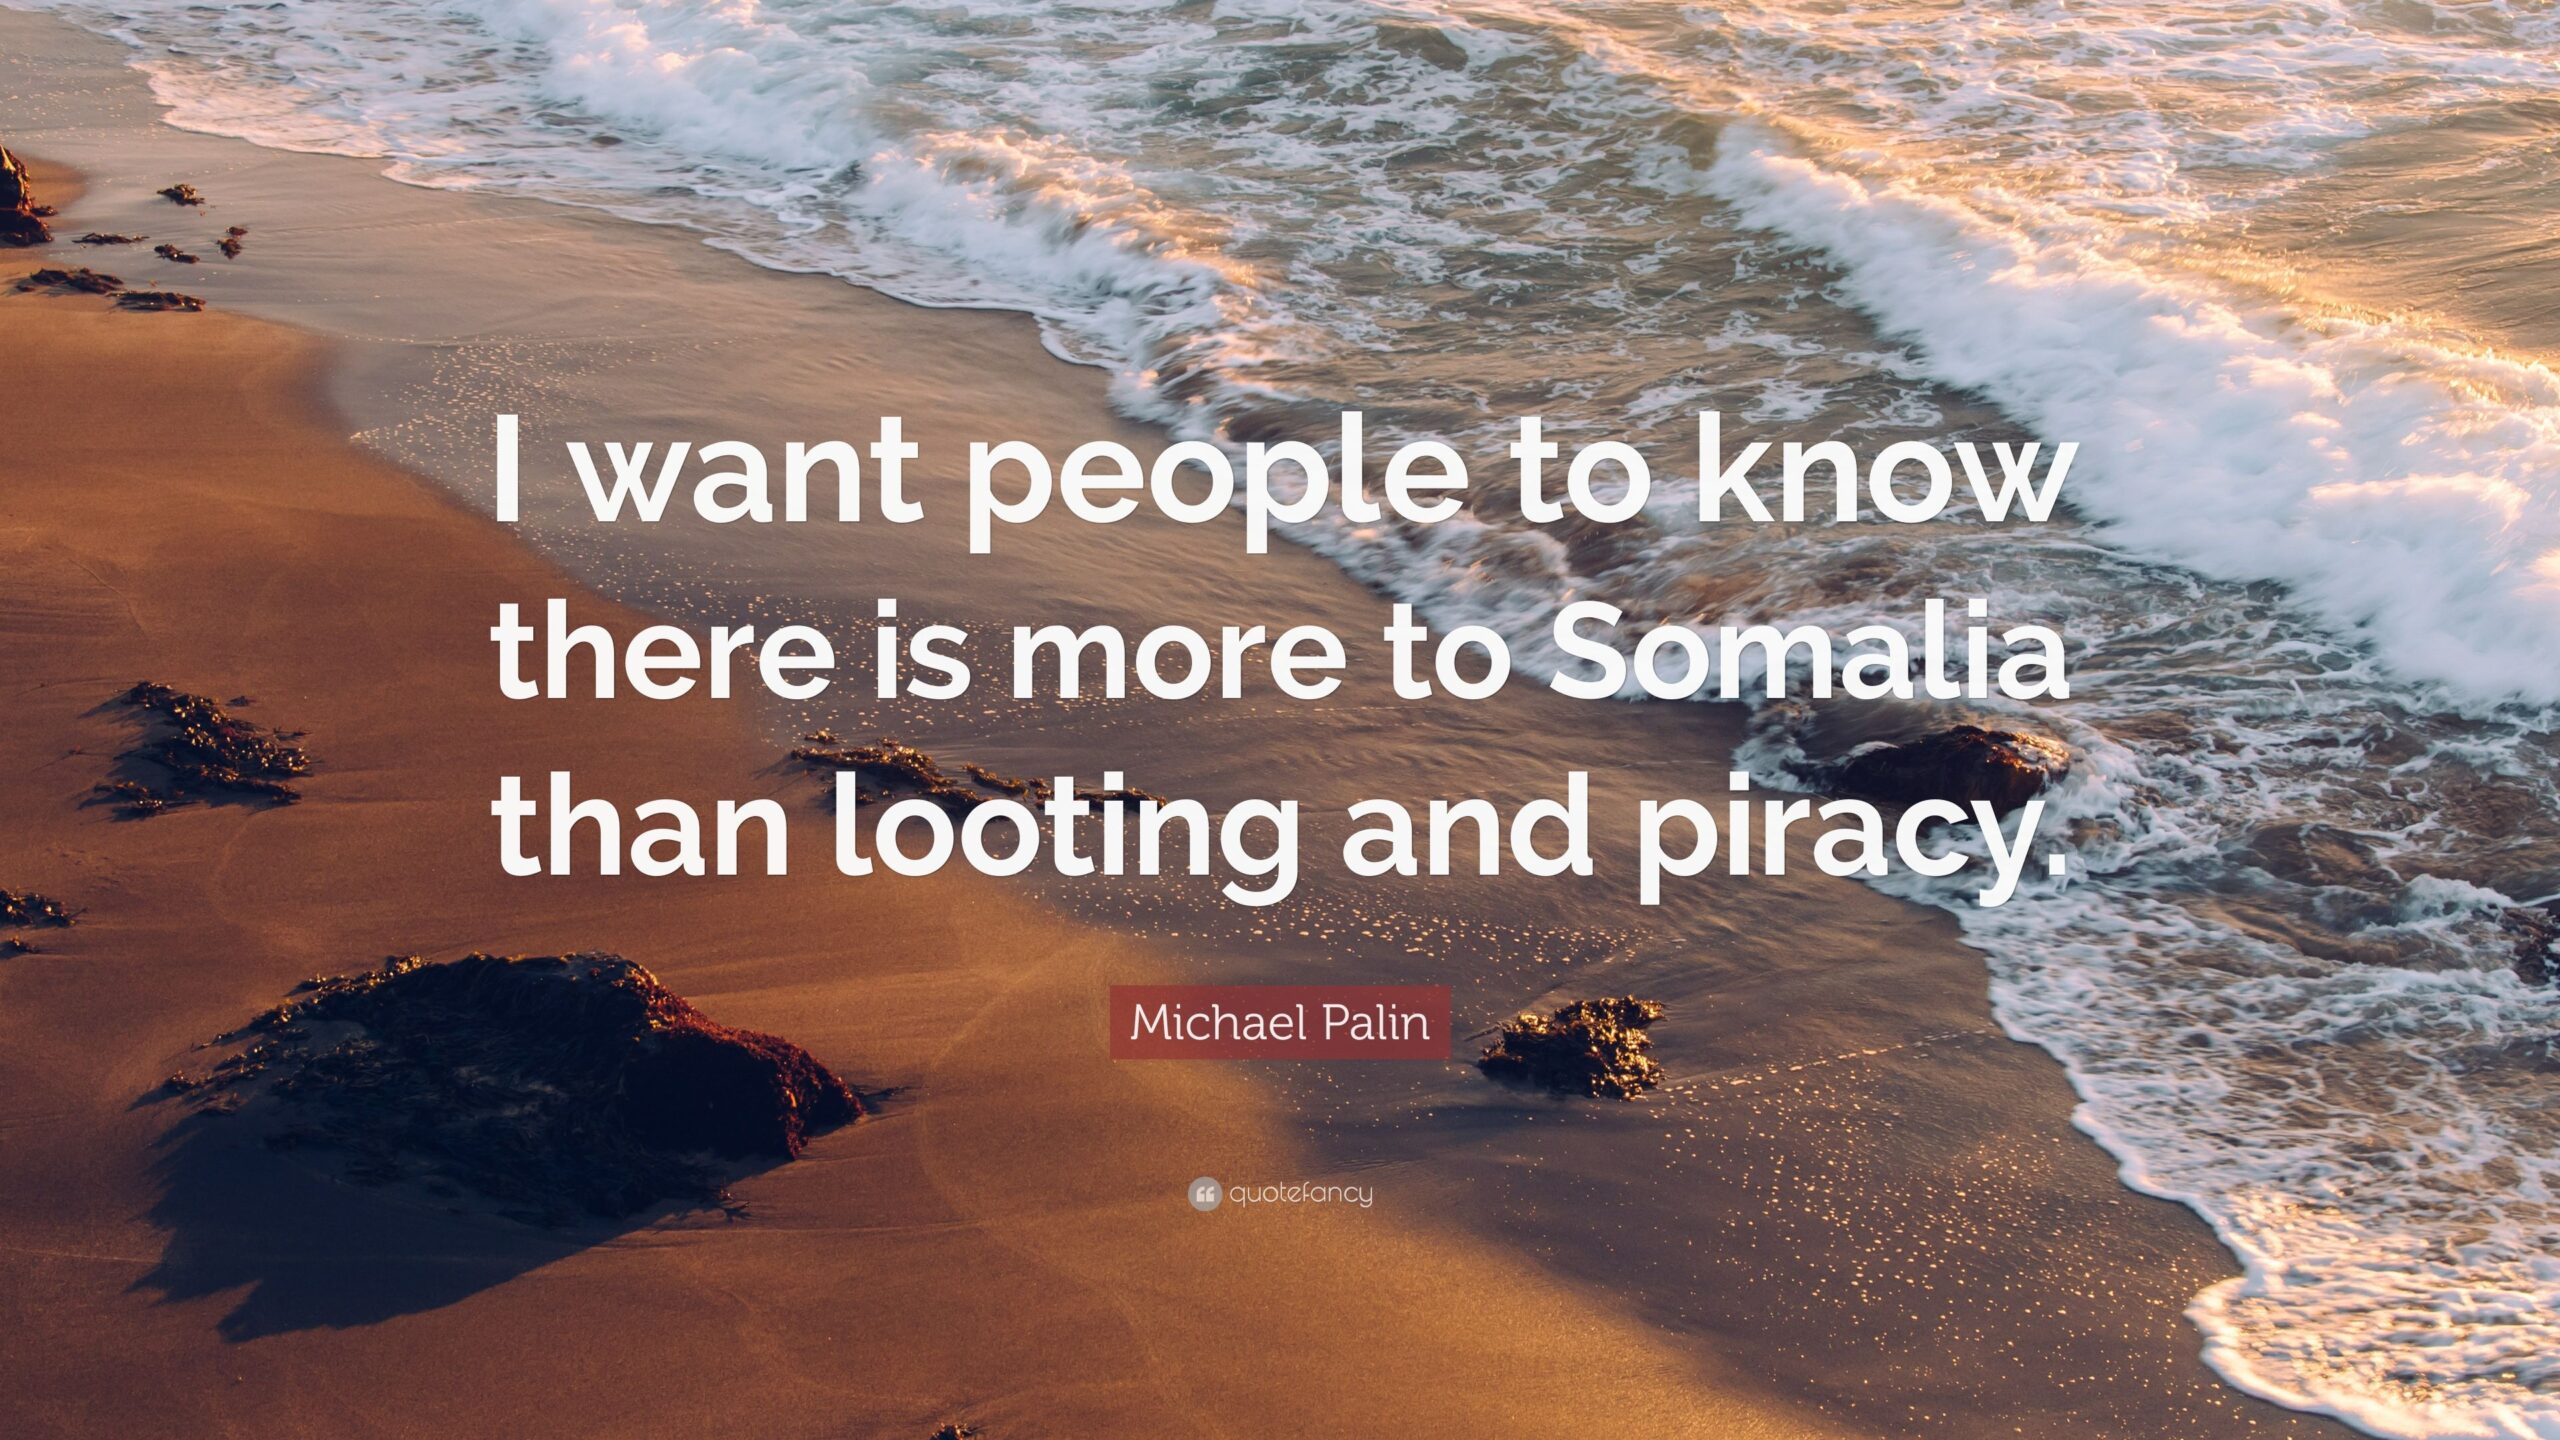 Michael Palin Quote “I want people to know there is more to Somalia